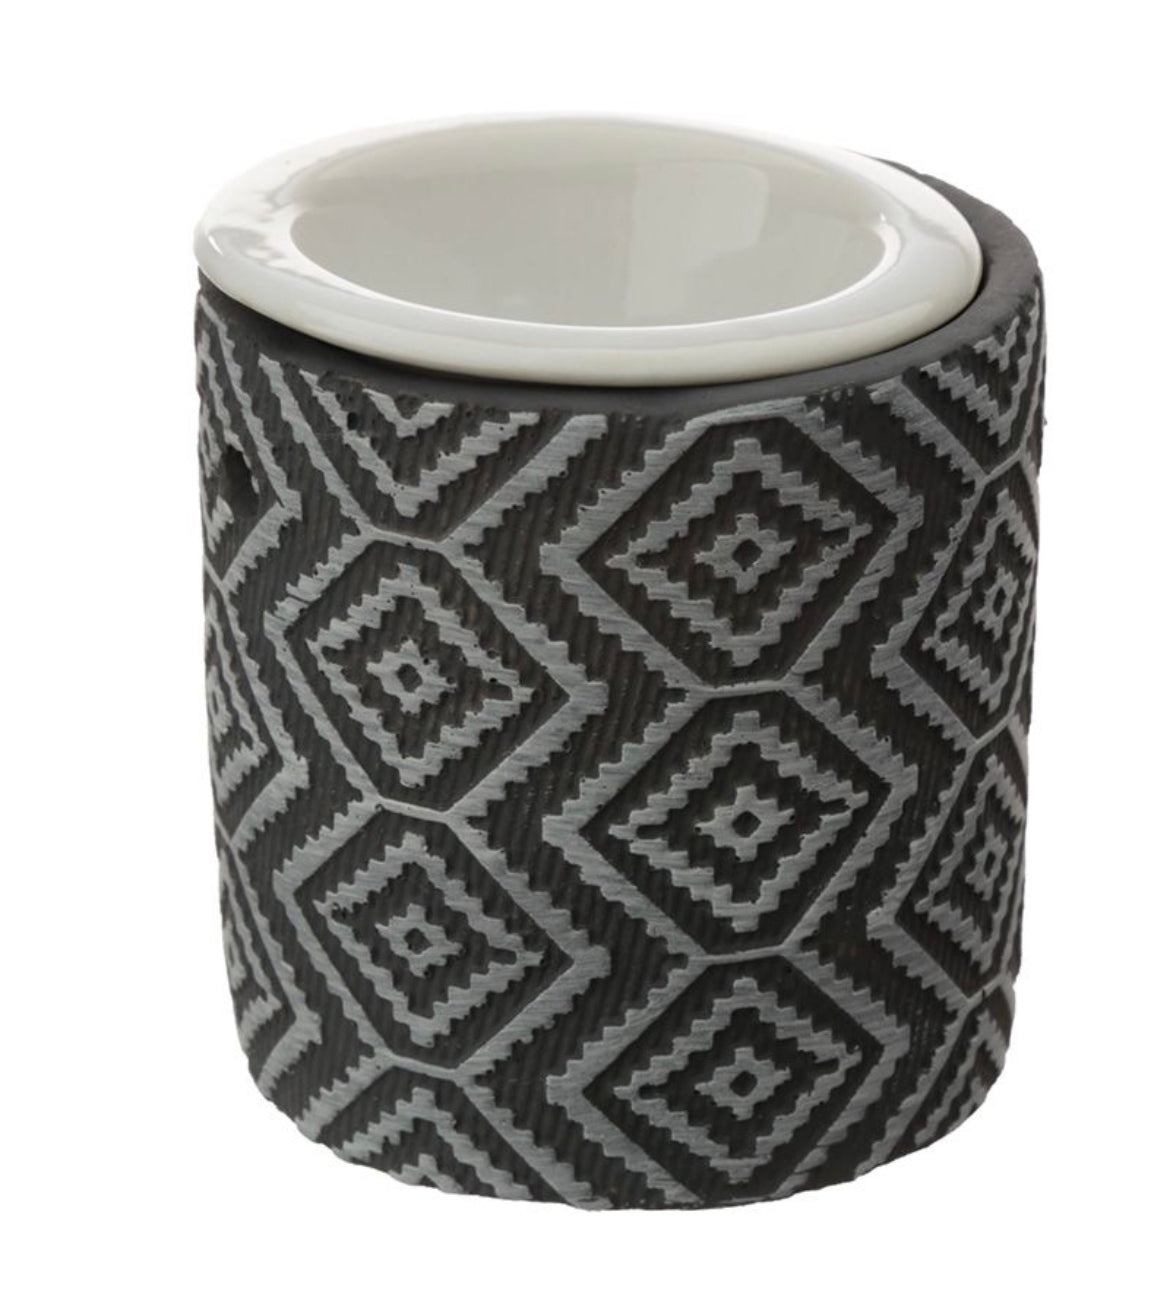 Grey Patterned Concrete Wax Burner with Ceramic Dish Wasson Wax